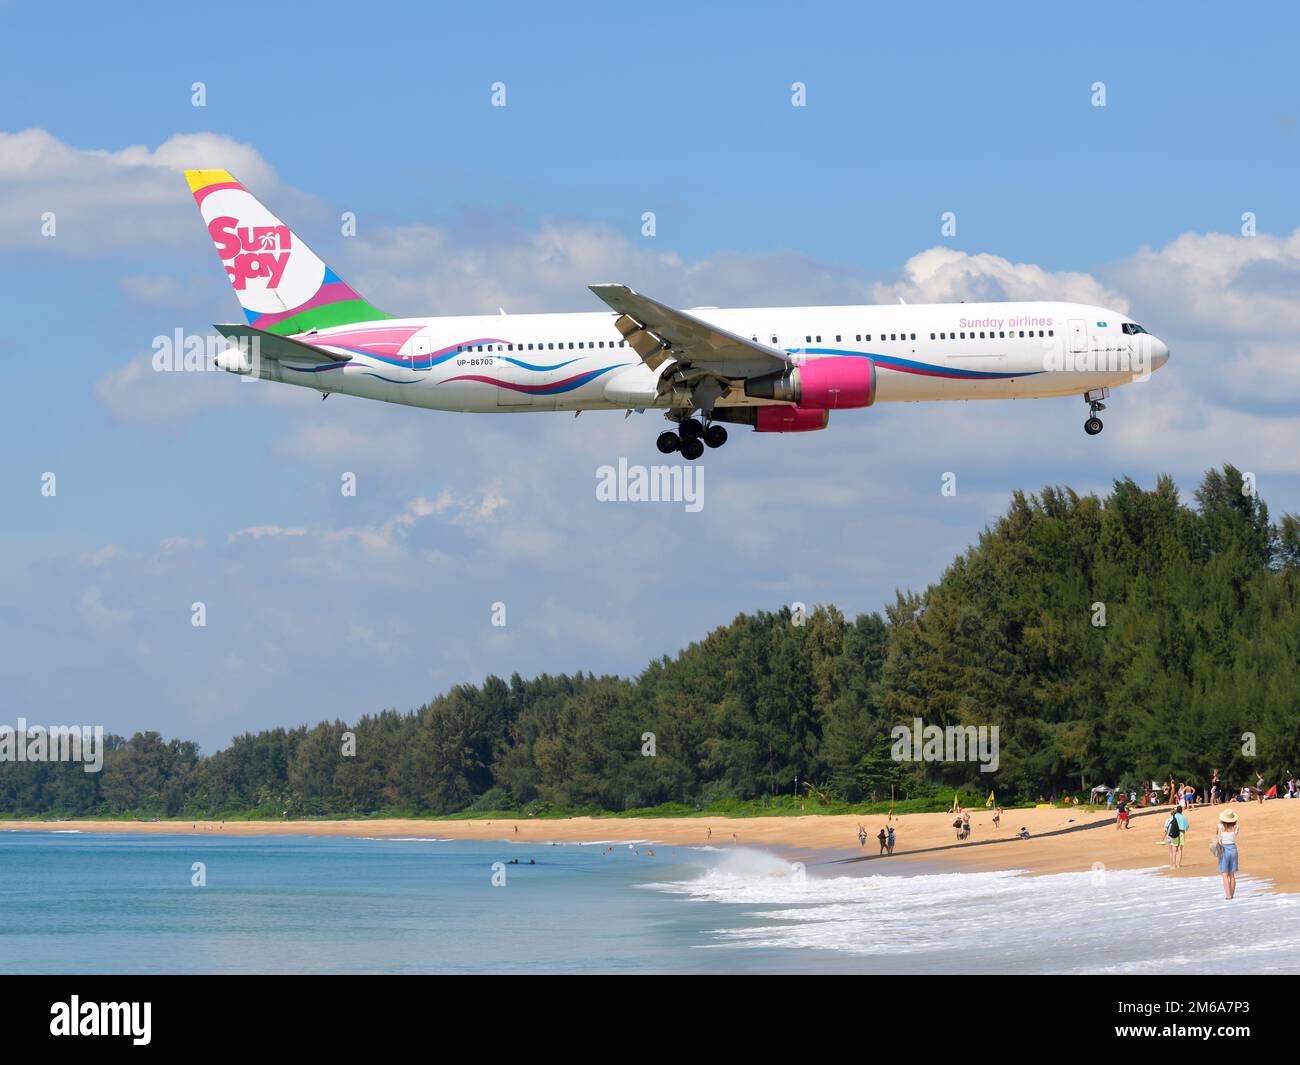 Sunday Airlines Boeing 767 aircraft. Charter airline from Kazakhstan Sunday Airline airplane 767 over Mai Khao Beach near Phuket Airport. Stock Photo